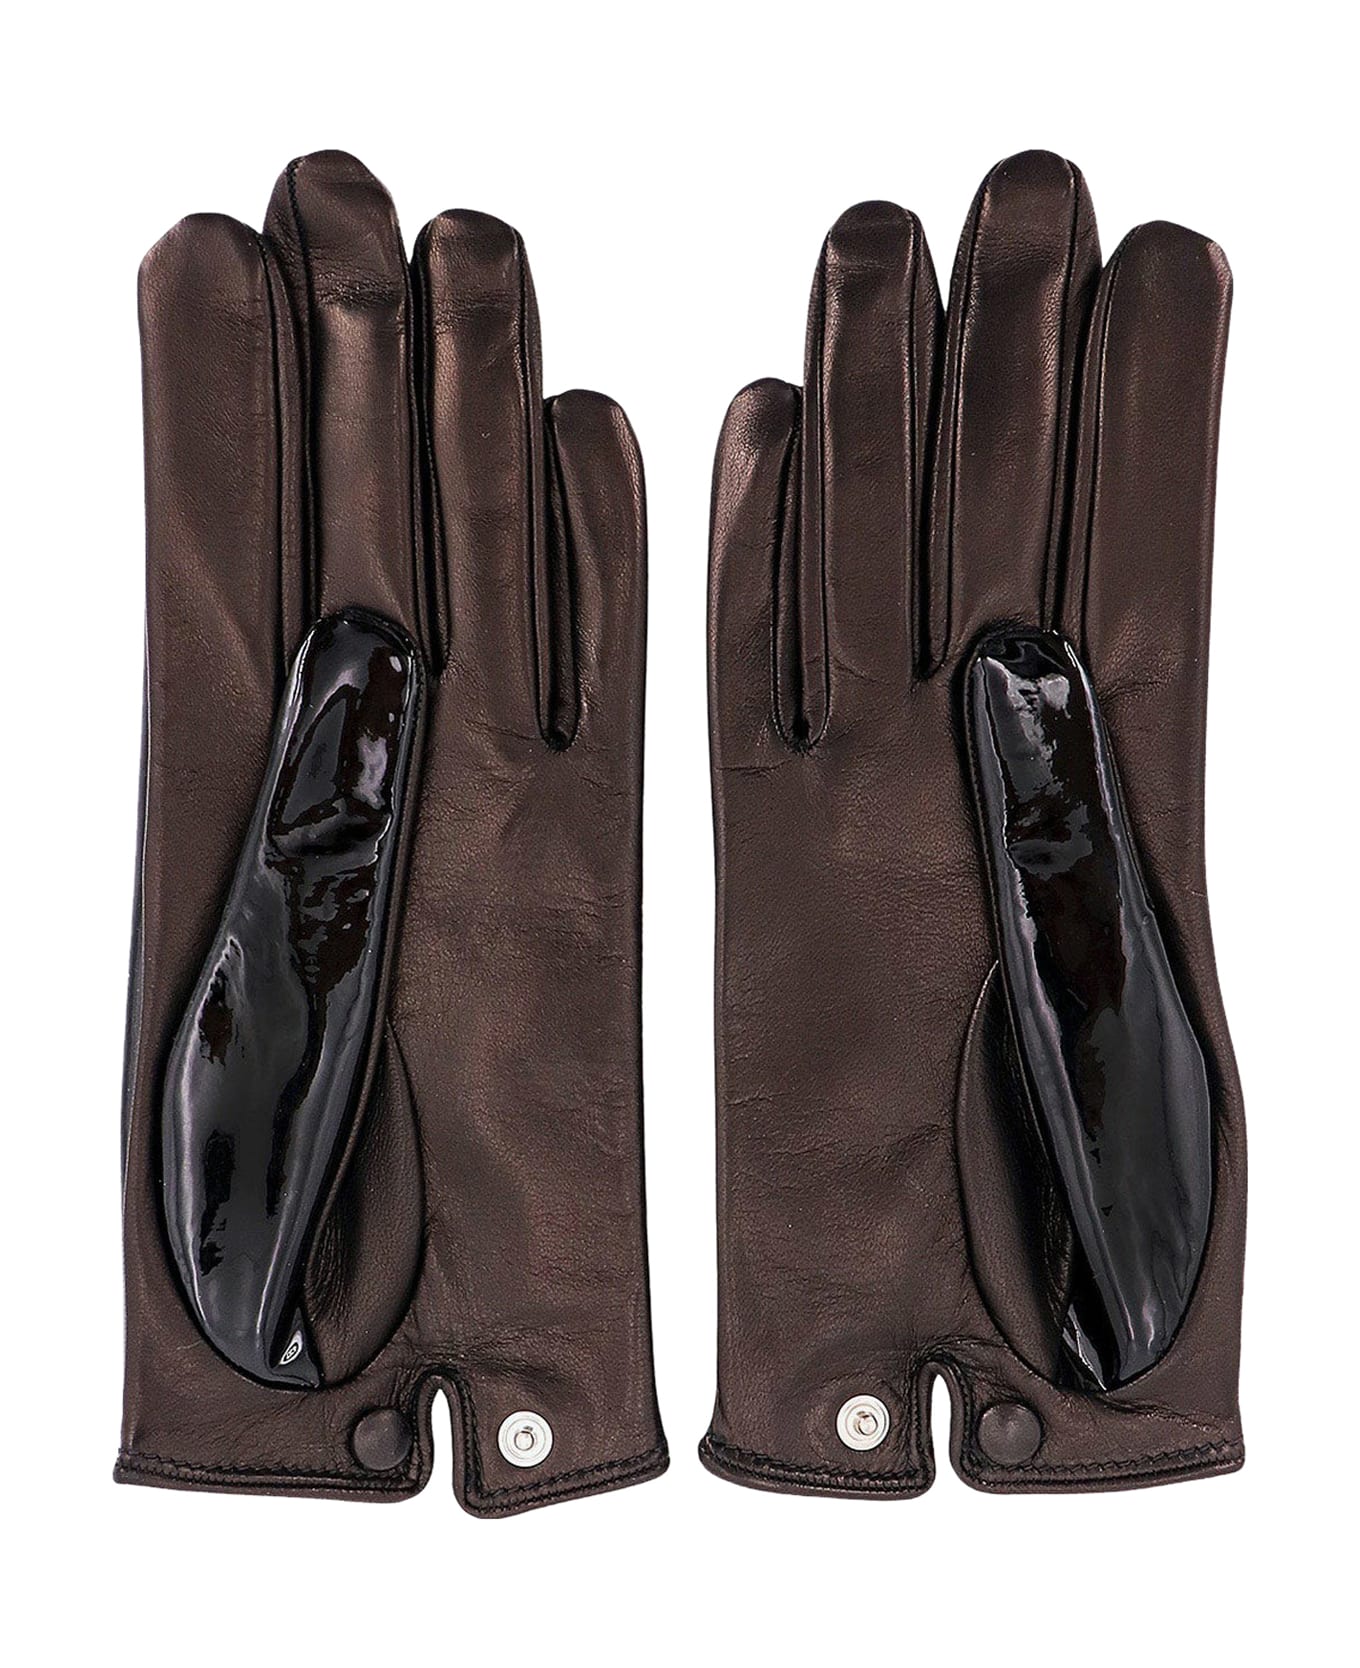 Durazzi Milano Patent And Calfskin Leather Gloves. Silk Lining - Black 手袋